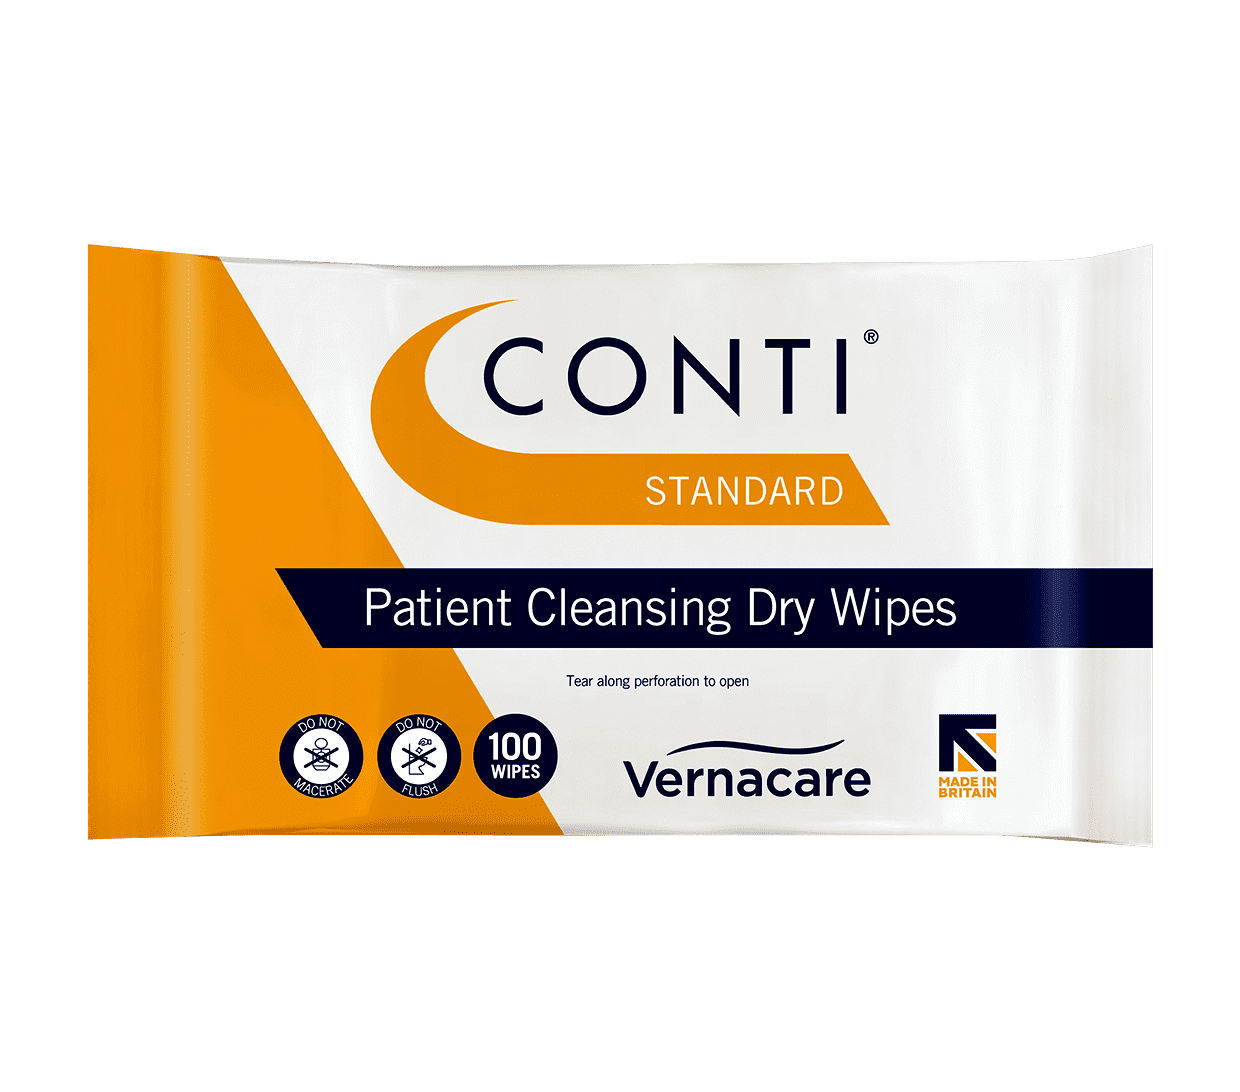 Dry patient wipes that are perfect for everyday use in care homes and home care settings. These patient dry wipes provide a cost-effective wipe that combines strength and performance in a lightweight material.